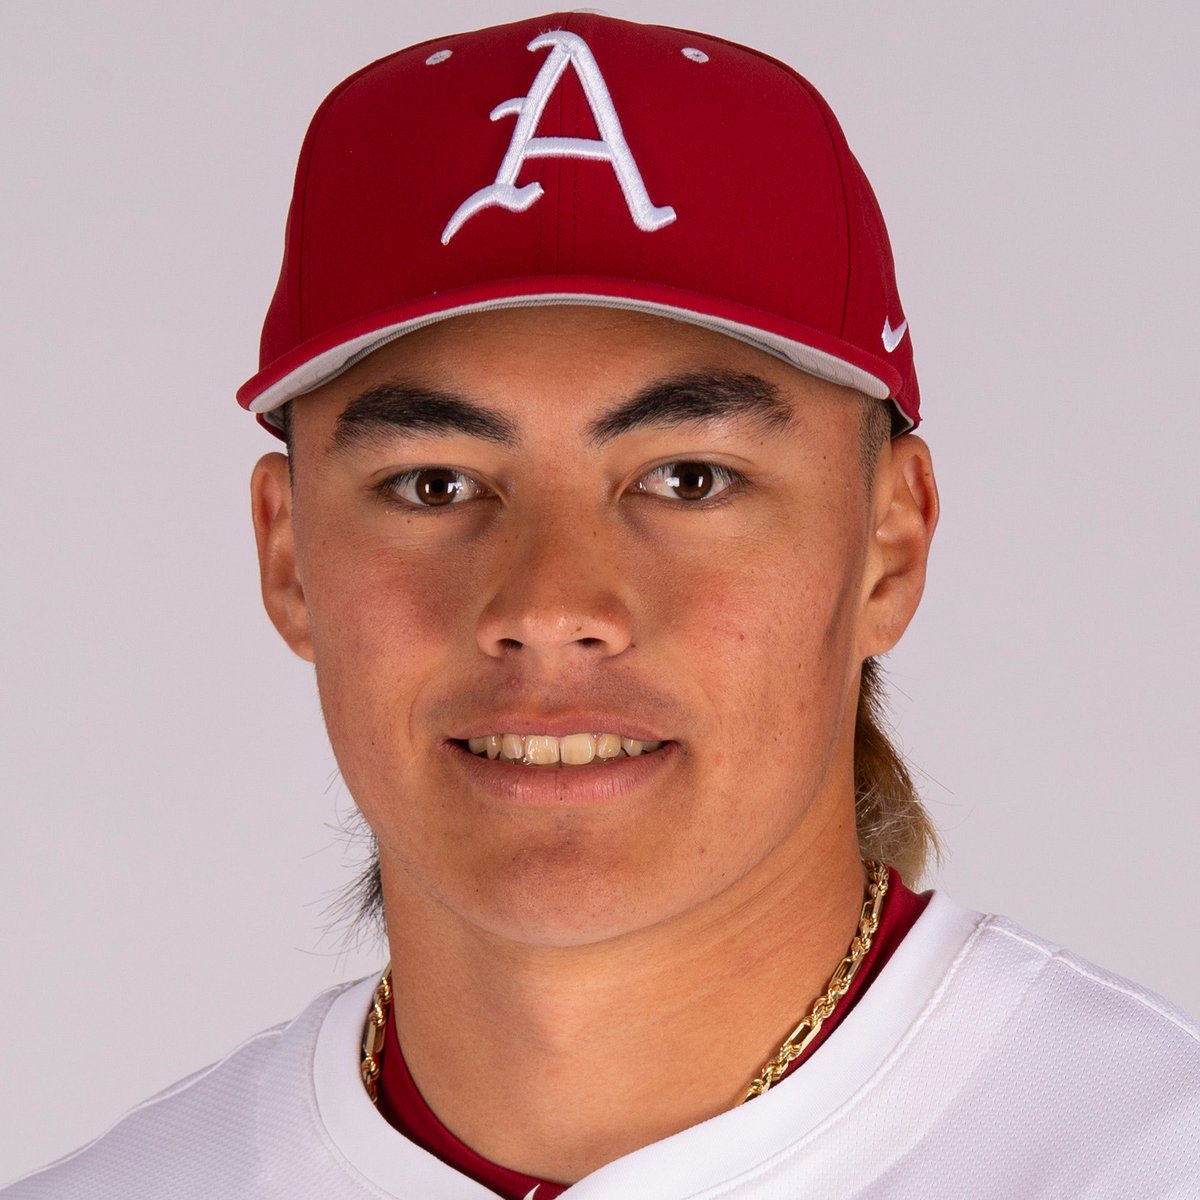 Hi, my name is Wehiwa and I just hit a grand salami in the first inning to give my Hogs a 4-0 lead.